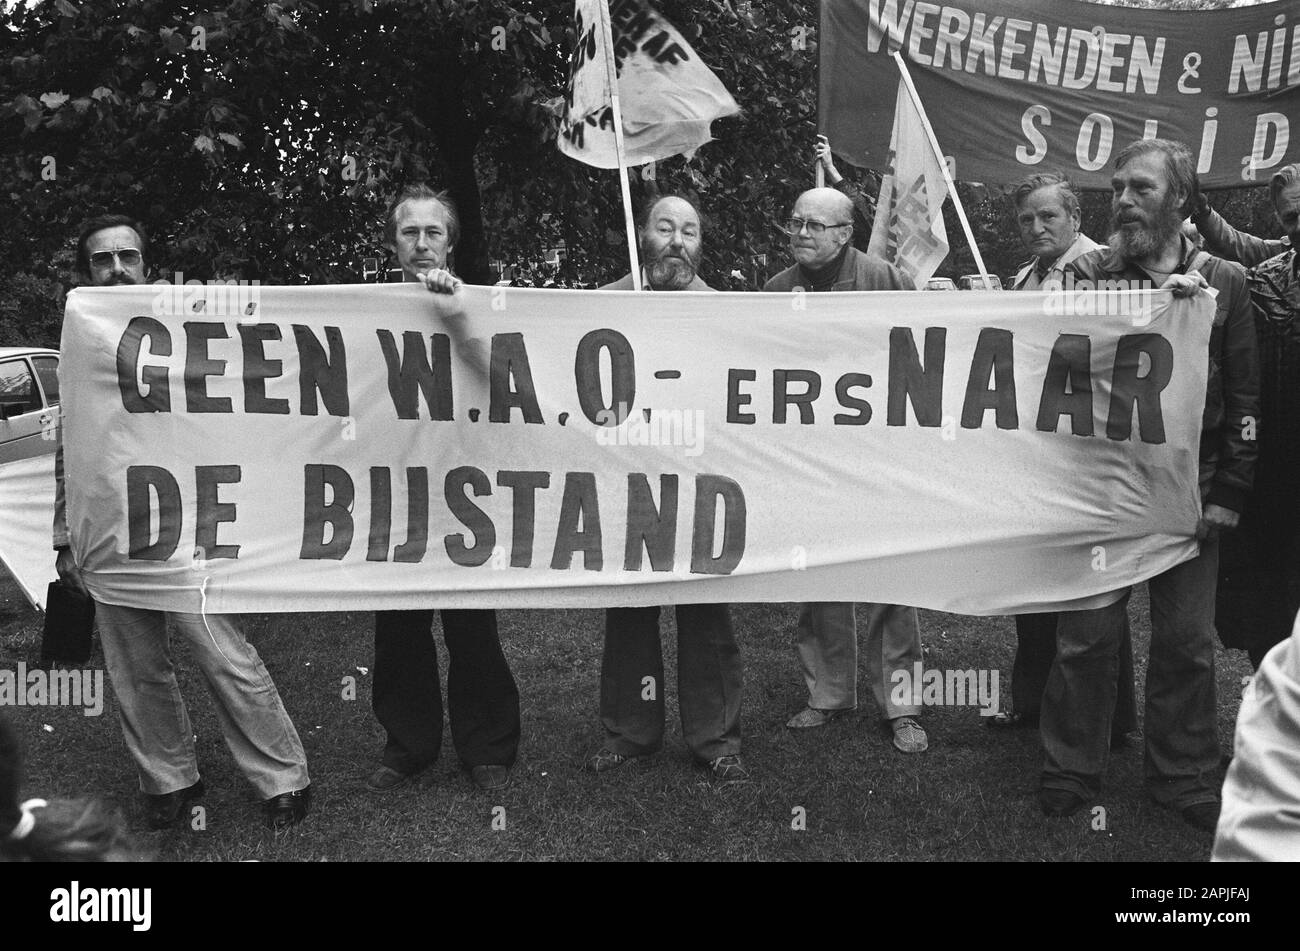 Protest of WAOers for the Joint Administration Office building in Amsterdam against austerity plans Description: demonstrators, cuts, disability, banners Date: September 10, 1980 Location: Amsterdam, Noord-Holland Keywords: incapacity for work, cuts, protesters, banners Stock Photo